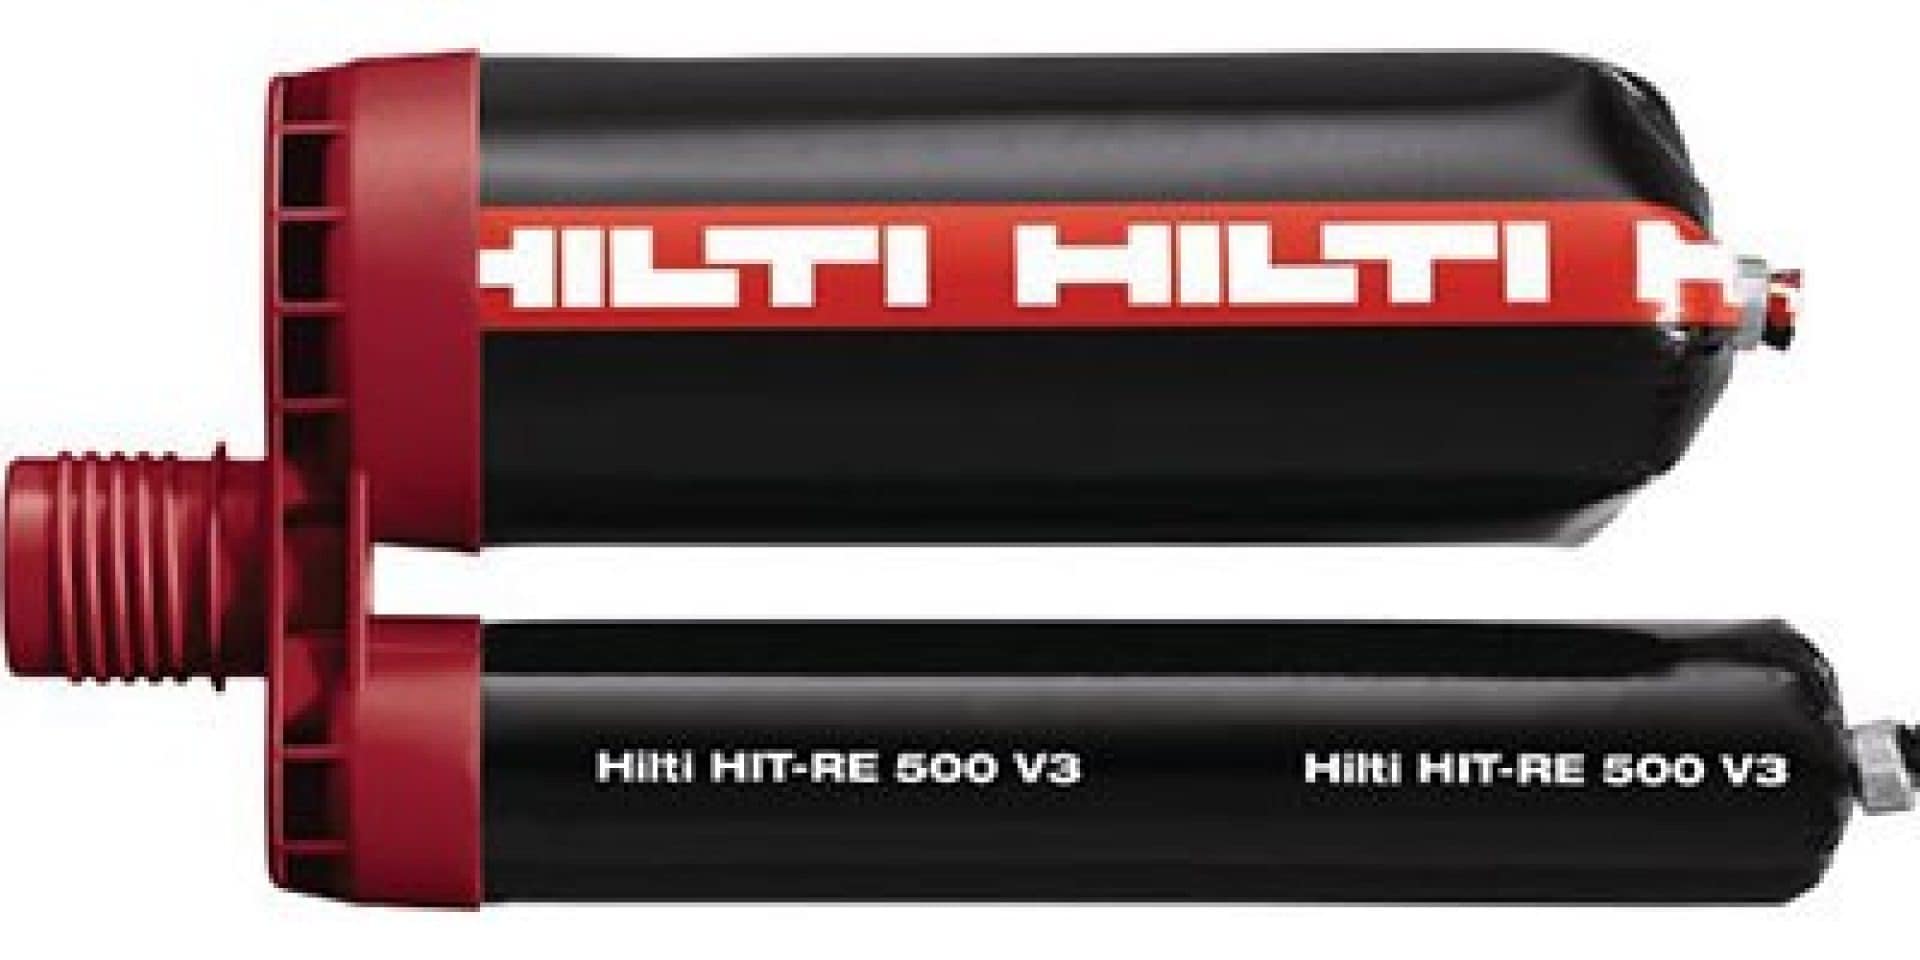 Hilti injectable mortar HIT-RE 500